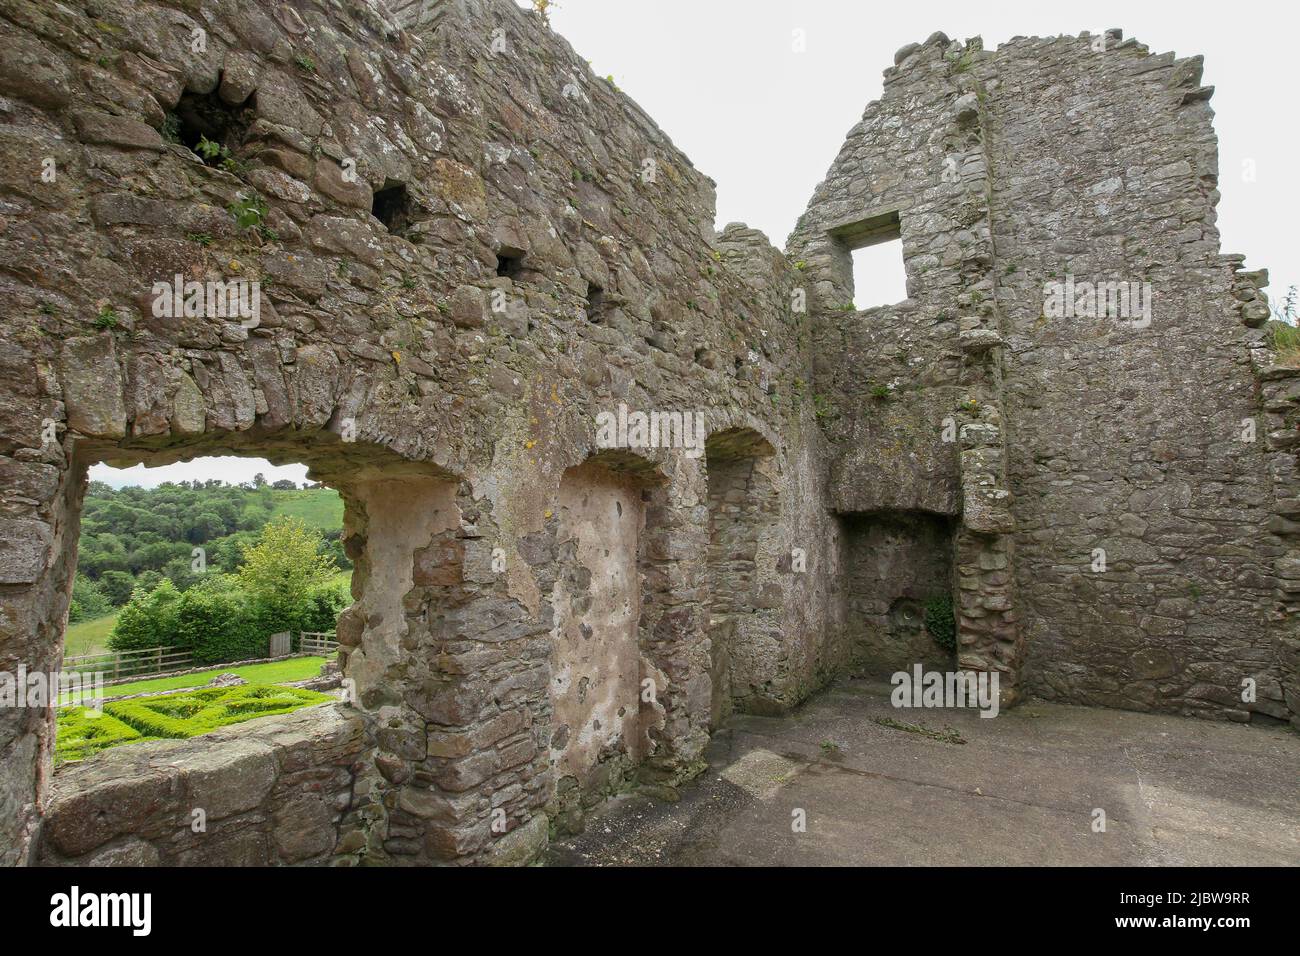 Tully Castle, Lough Erne, County Fermanagh, Northern Ireland Stock Photo